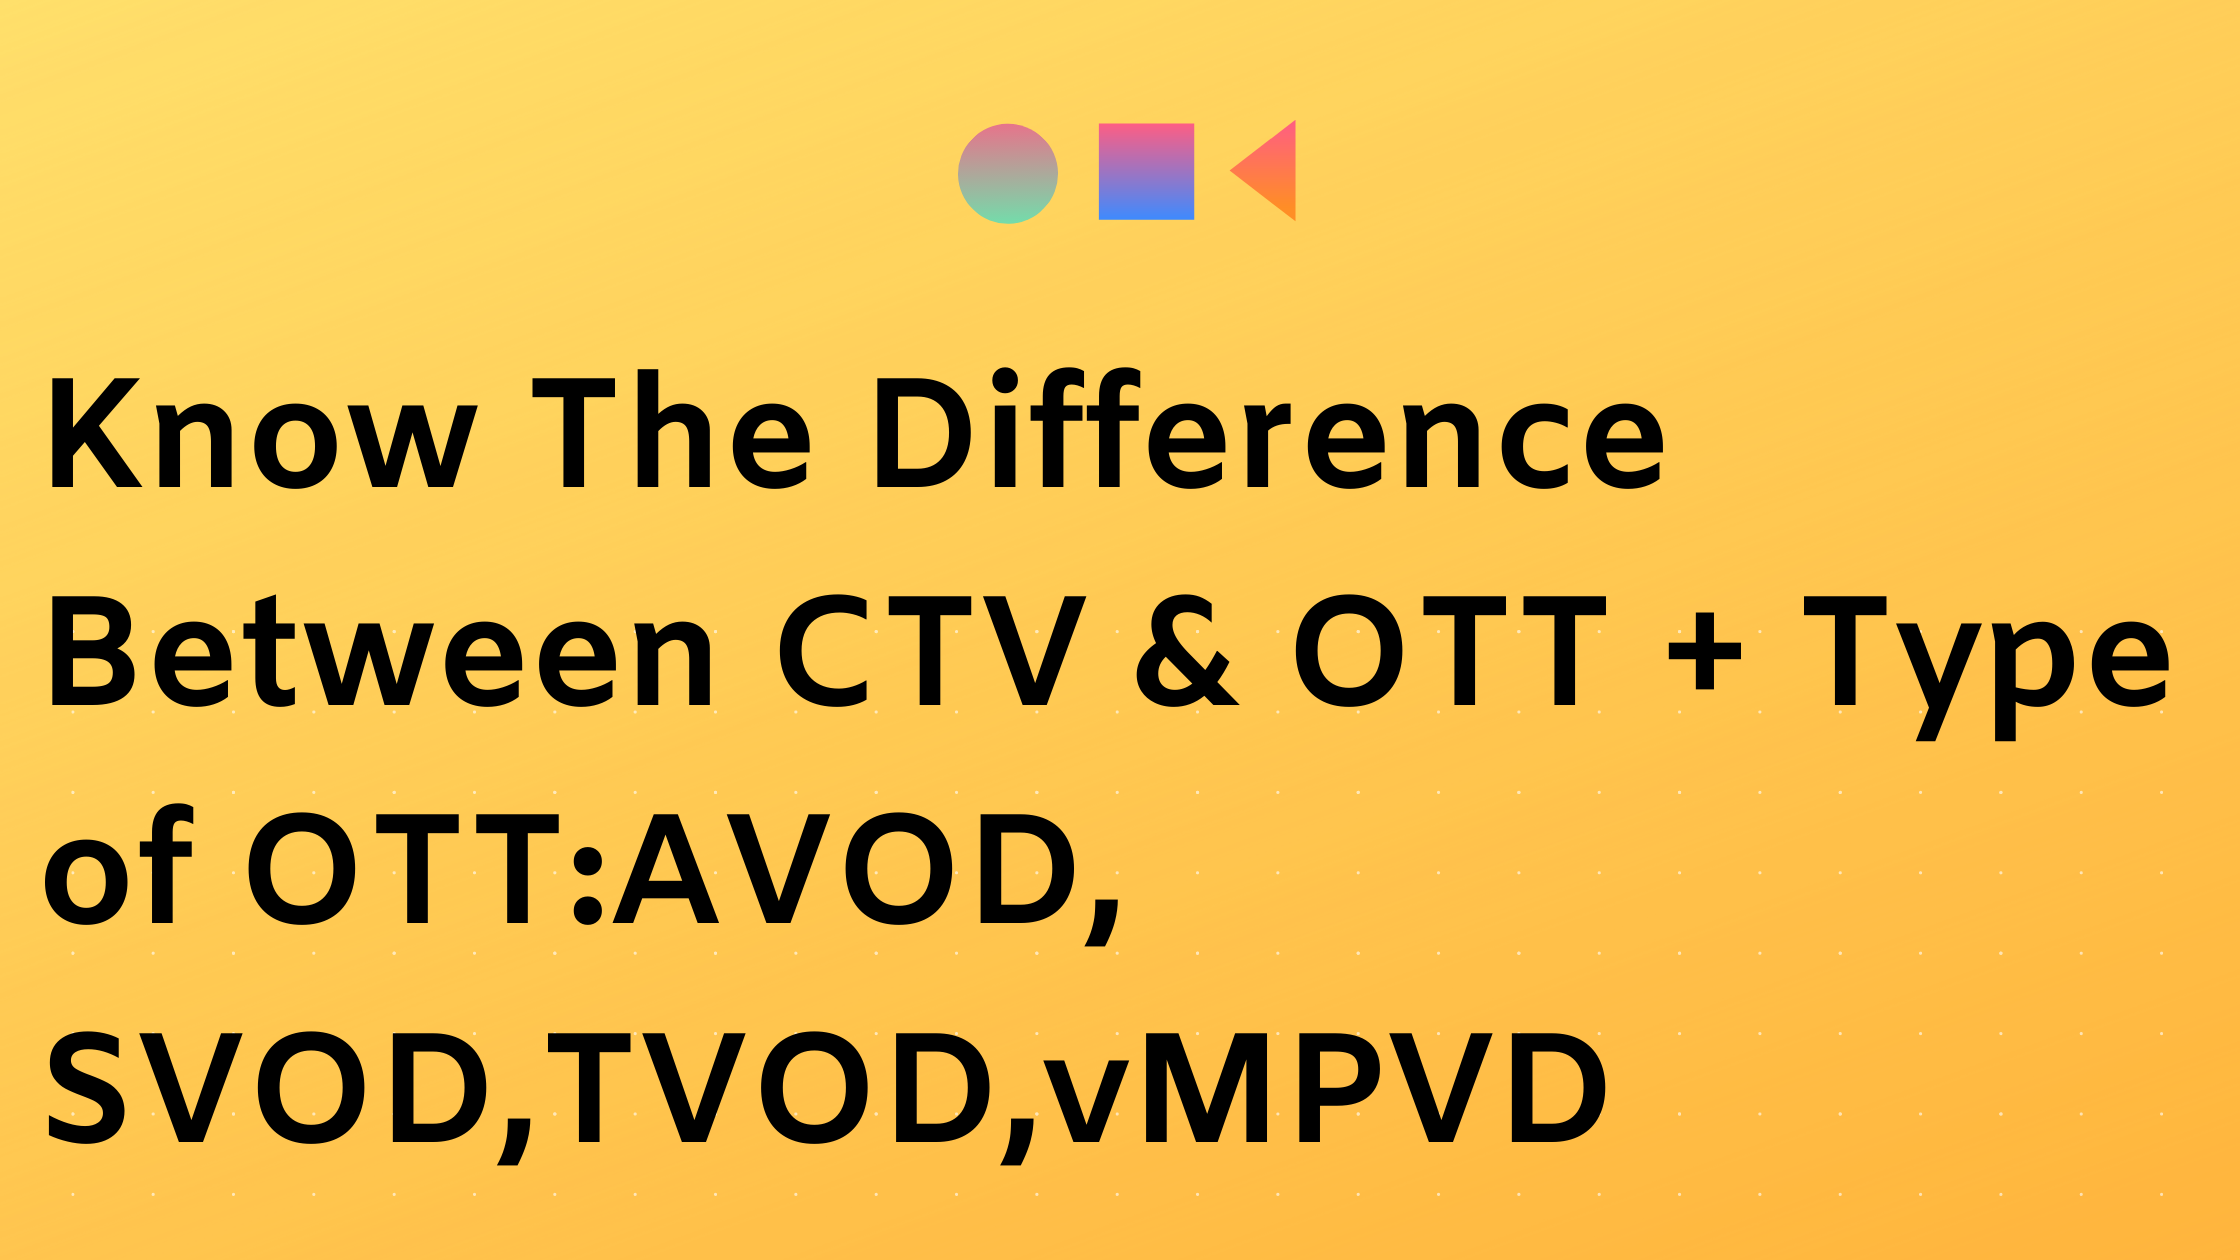 Difference Between CTV vs OTT and Type of OTT Streaming Video On Demand AVOD, SVOD,TVOD and Hybrid Revenue Model